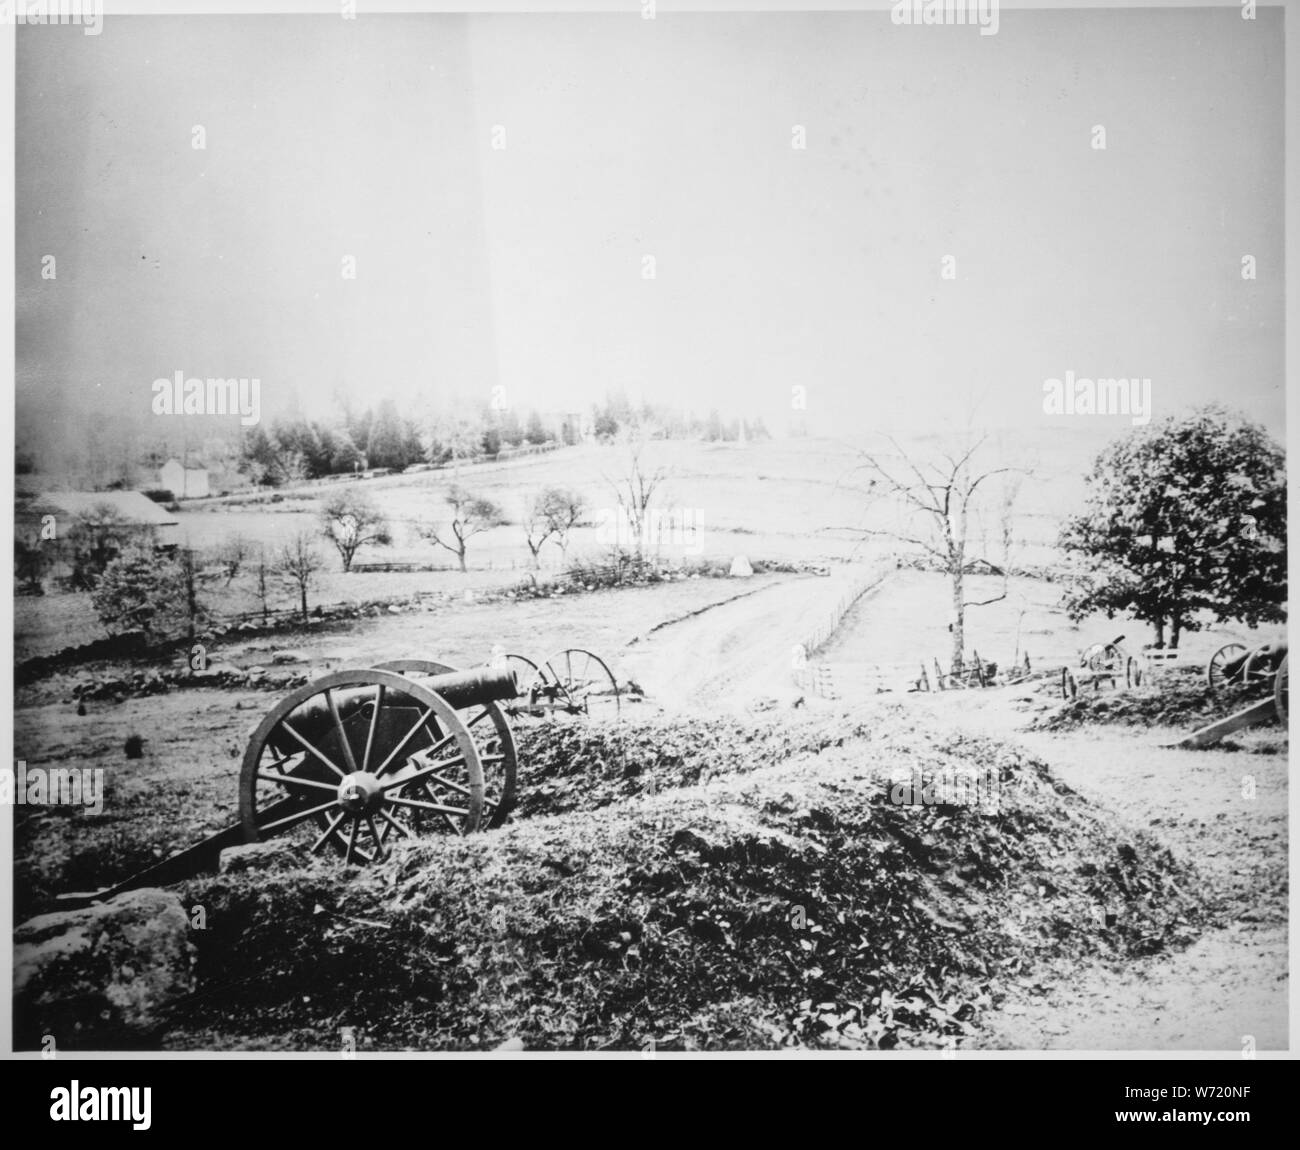 Barlows' Knoll after first day's battle, Gettysburg, Pennsylvania, northwest of town. July 1, 1863., ca. 1960 - ca. 1997; General notes:  Inaccurately-titled/dated image of Battle of Gettysburg artillery lunettes on en:Stevens Knoll with unattended postbellum cannon placed during the Gettysburg Battlefield commemorative era near Slocum Avenue (center), which turns westward to the Baltimore Pike (background).  Cemetery Hill (background) has faint image of the en:Evergreen Cemetery gatehouse along the Pike with the gatehouse archway depicted darker than the roofline and towers.  Slocum Av was bu Stock Photo